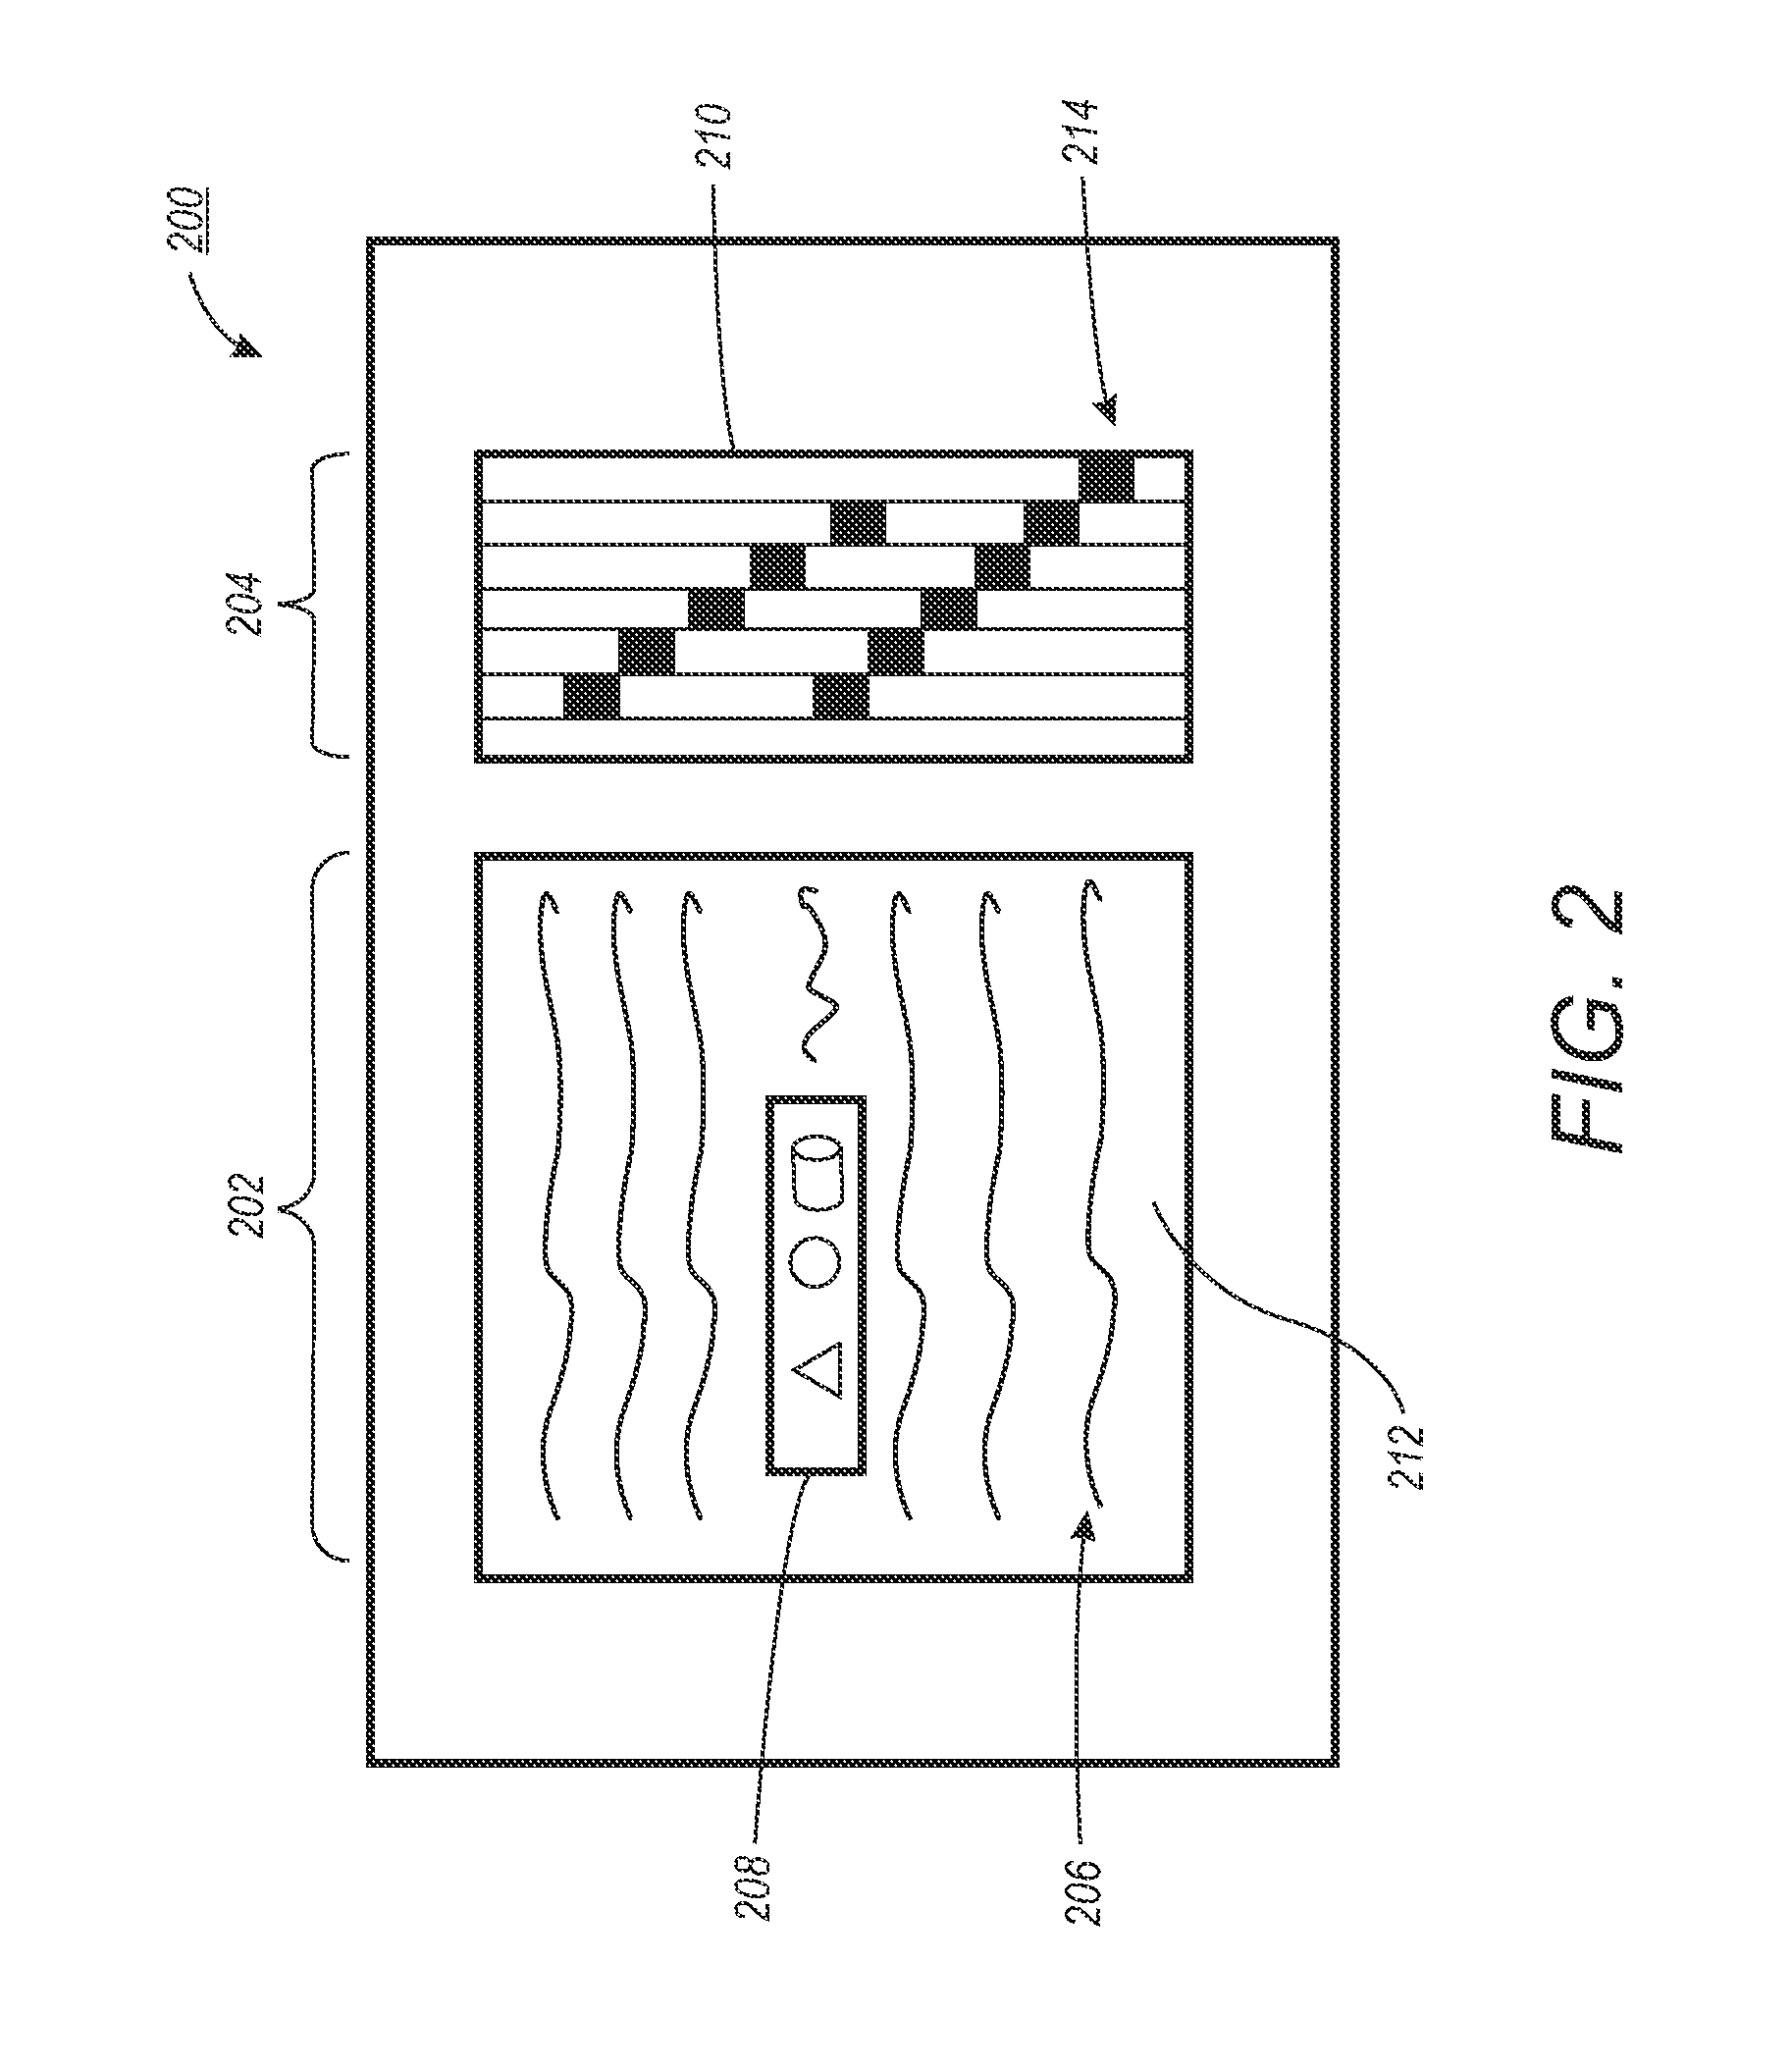 Riffler interface for an electronic reading device